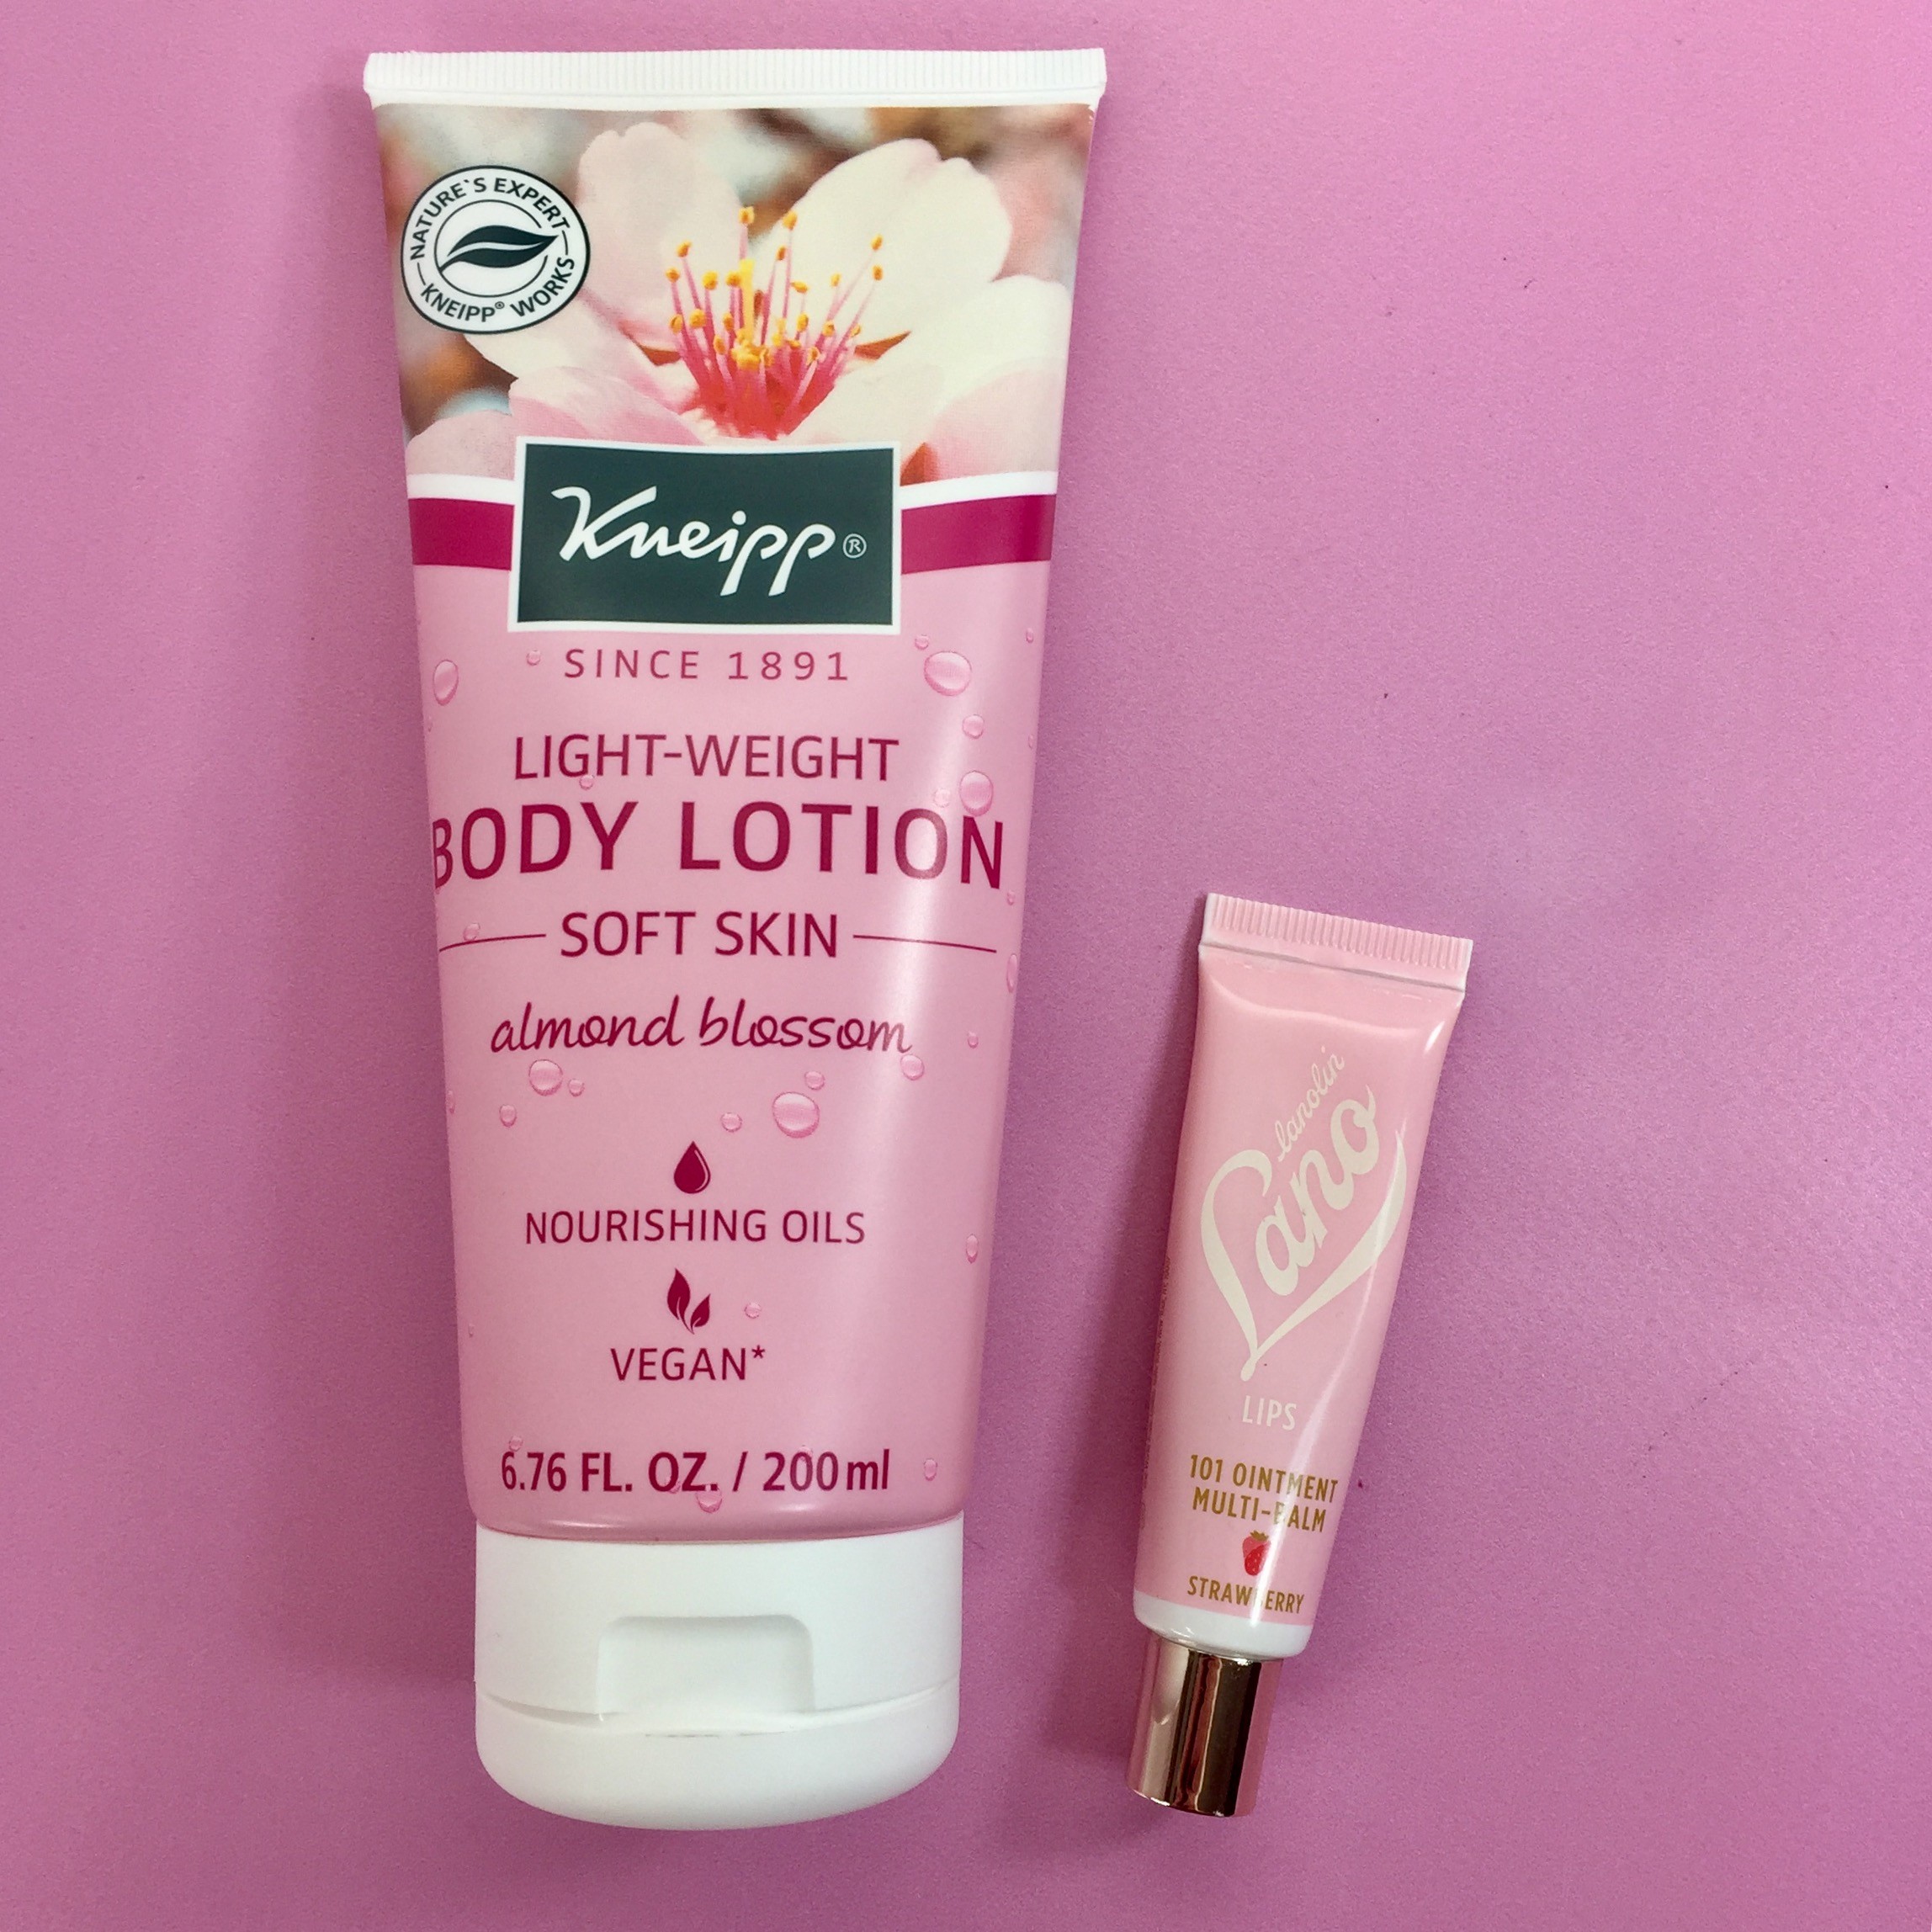 Kneipp and Lanolips